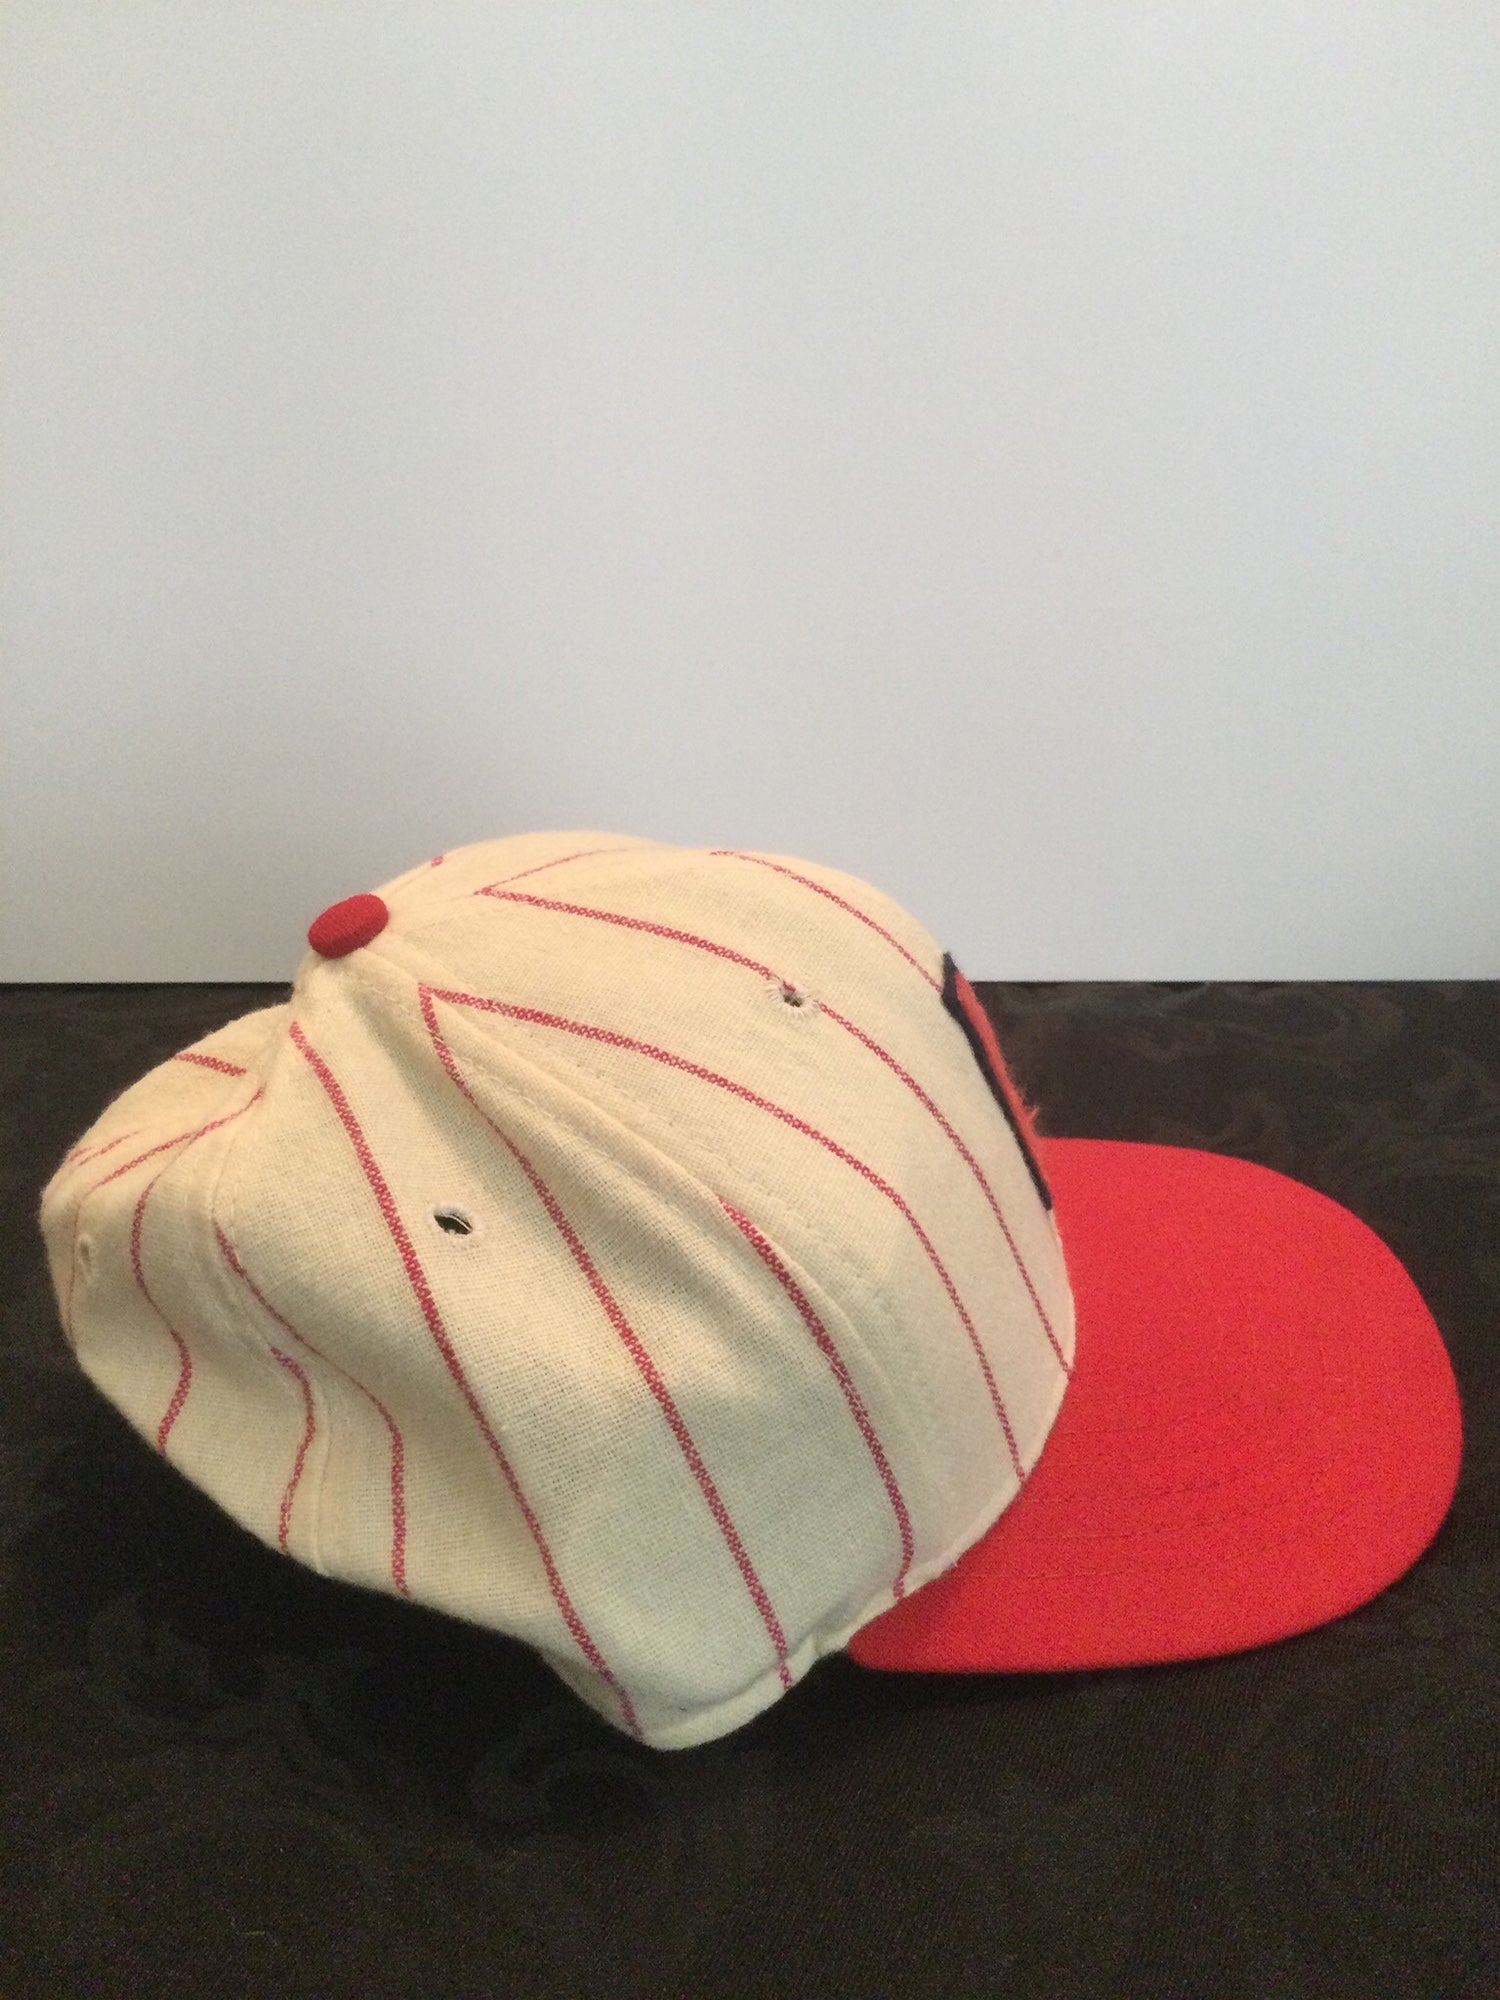 BOSTON RED SOX VINTAGE 1990'S ROMAN FITTED ADULT HAT 7 1/4